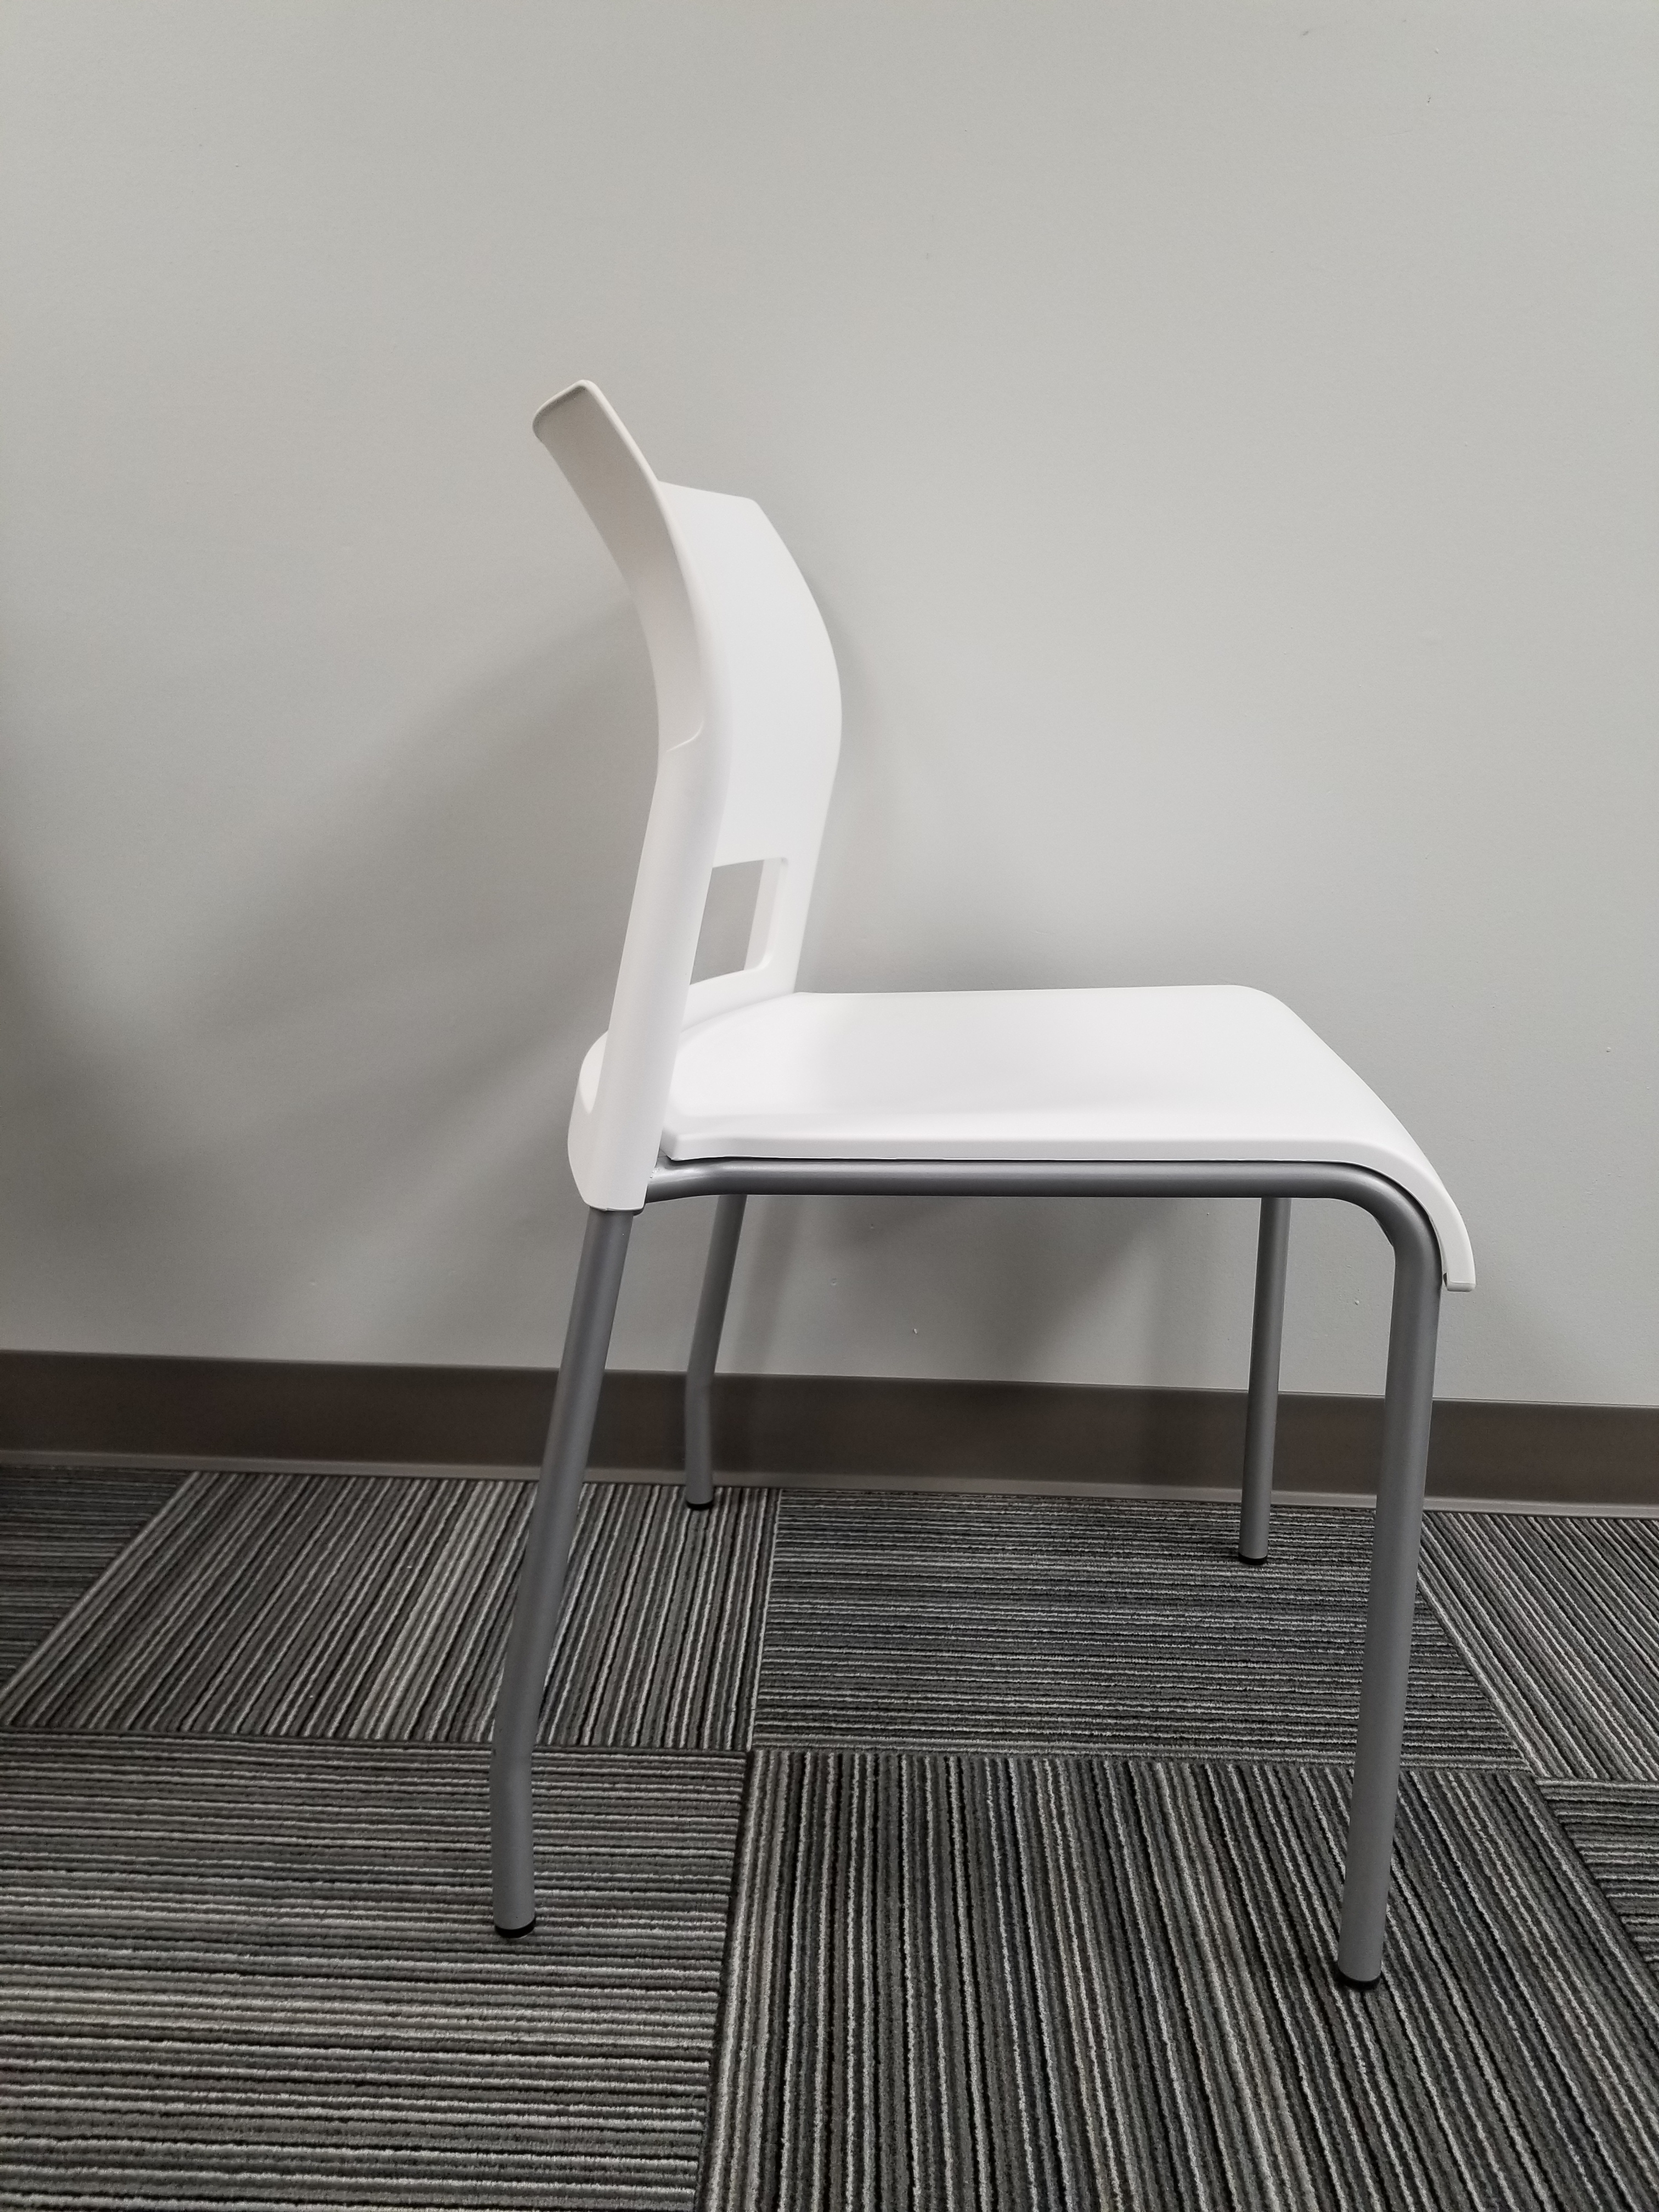 Contemporary White Plastic Steelcase Move Chair - Office Furniture